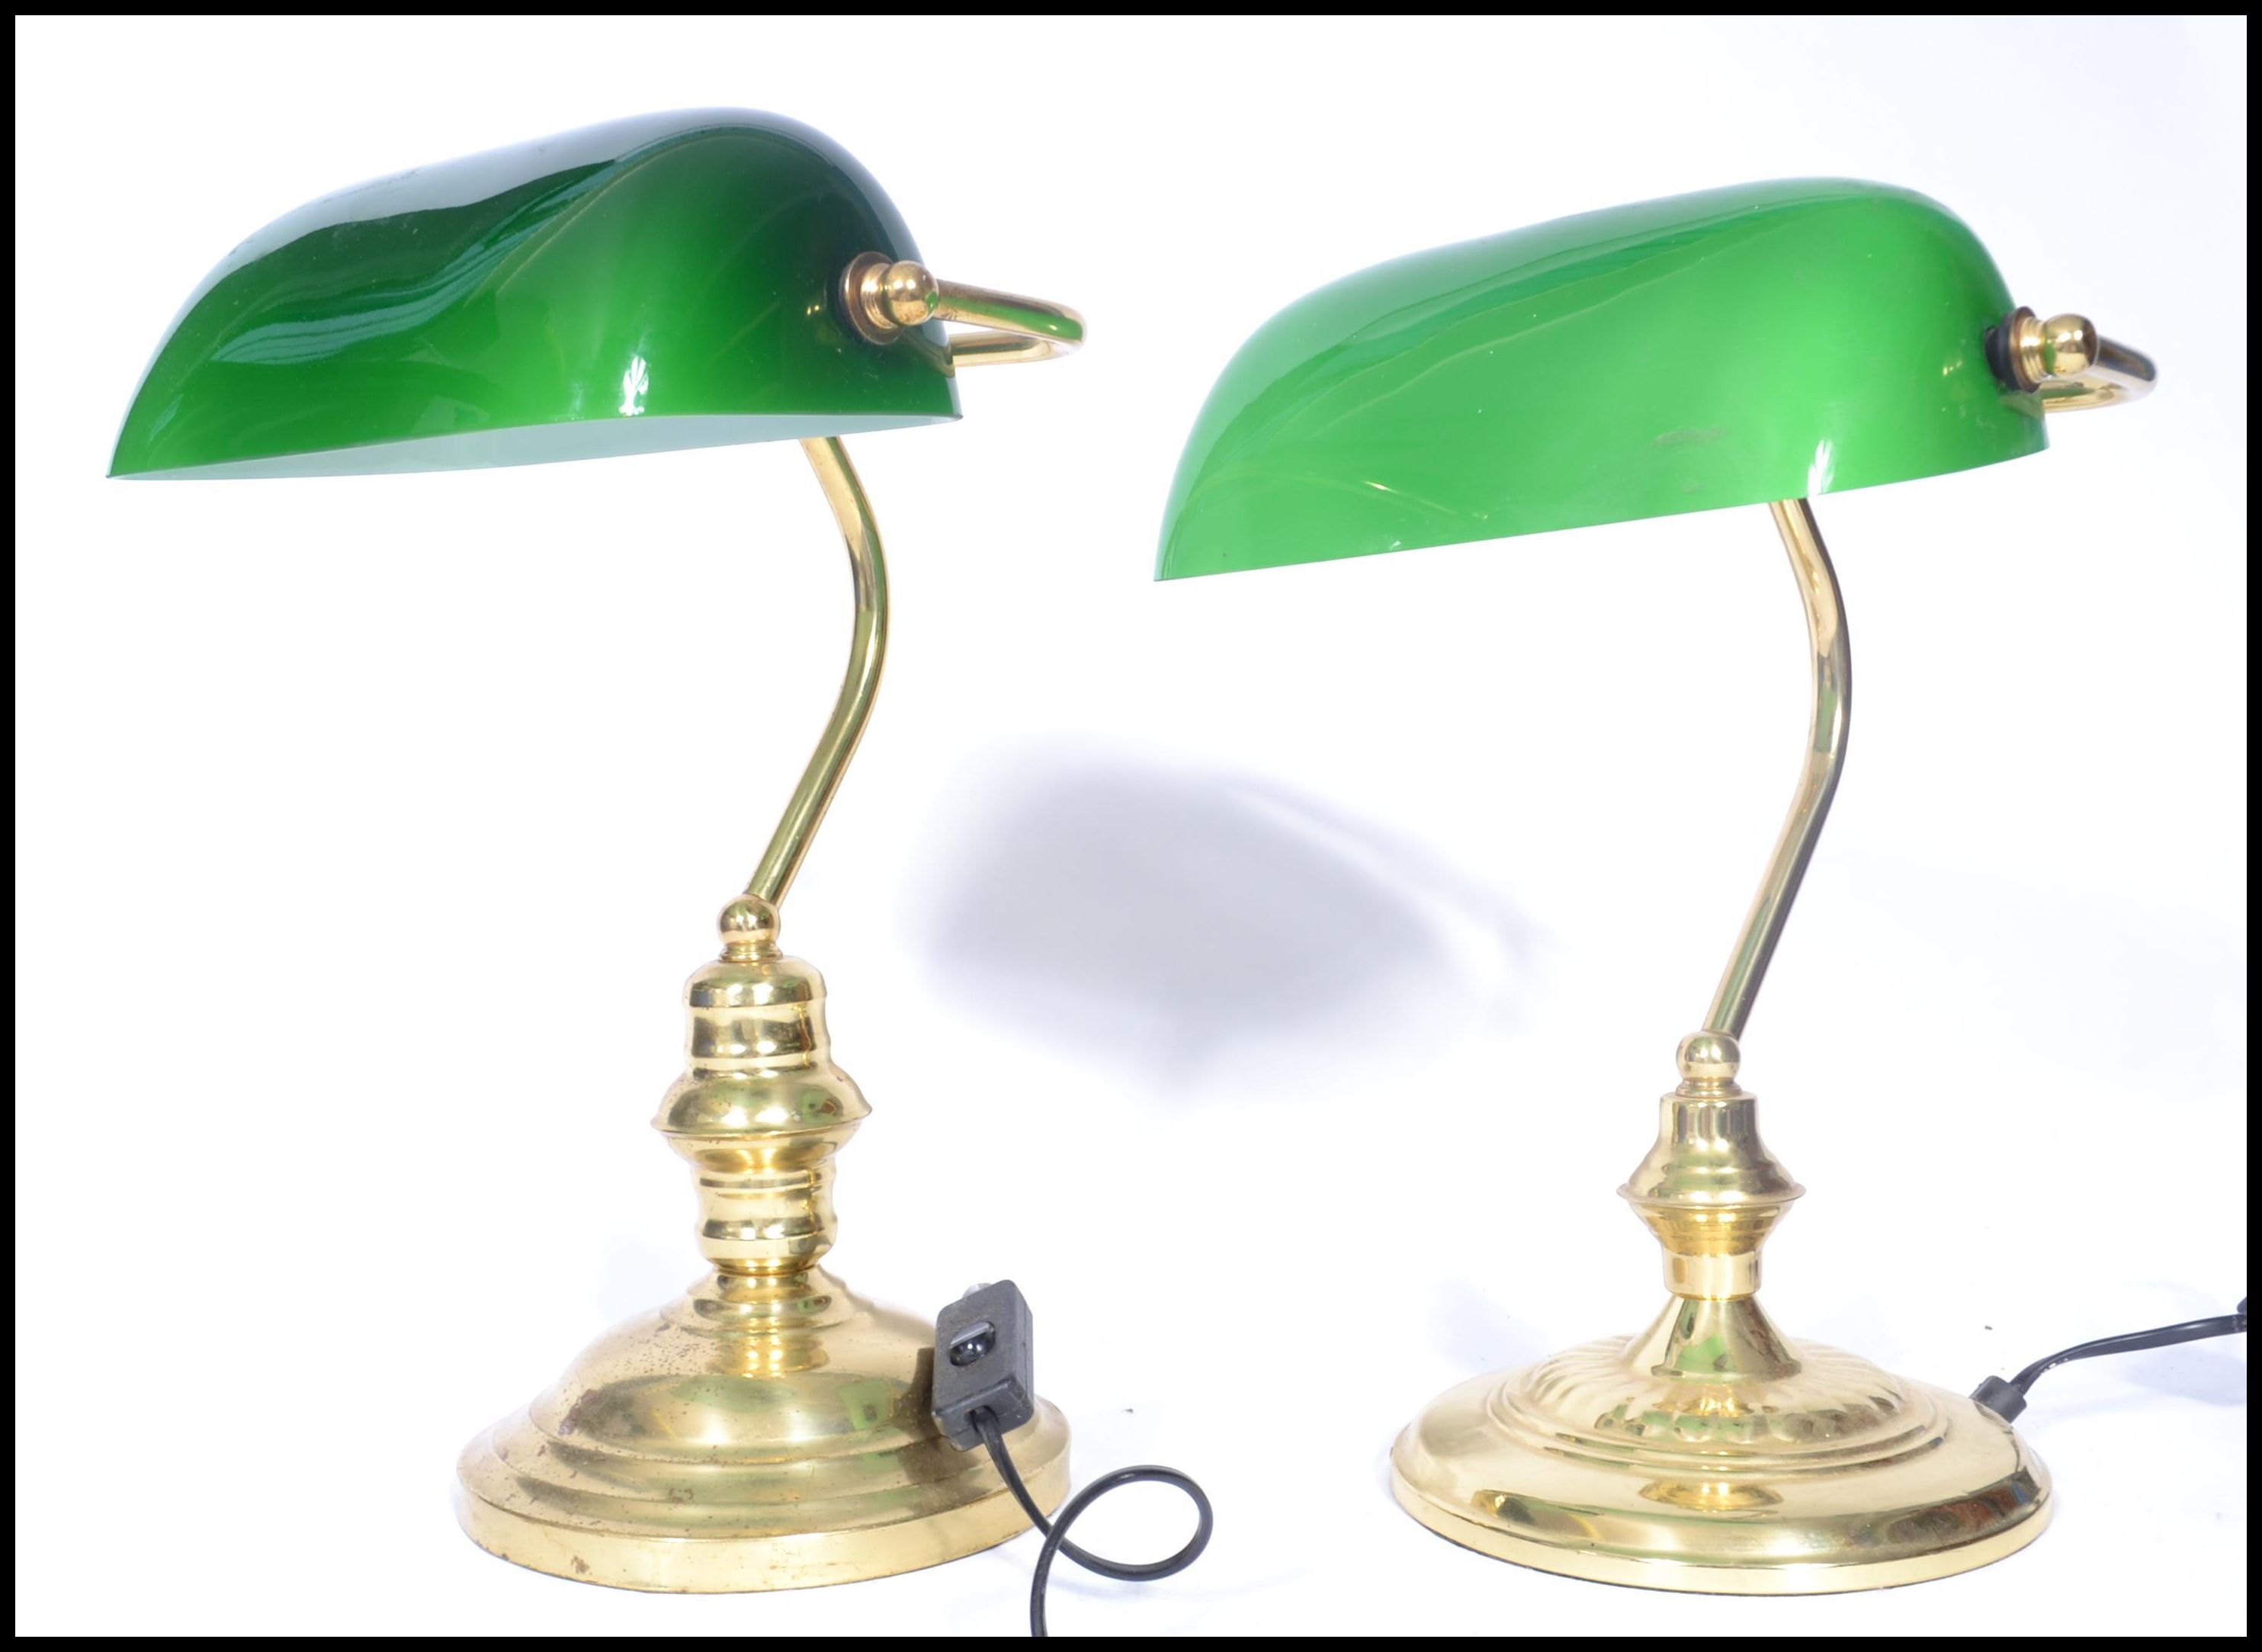 A near pair of vintage style 20th century brass bankers lamps raised on circular bases with arched